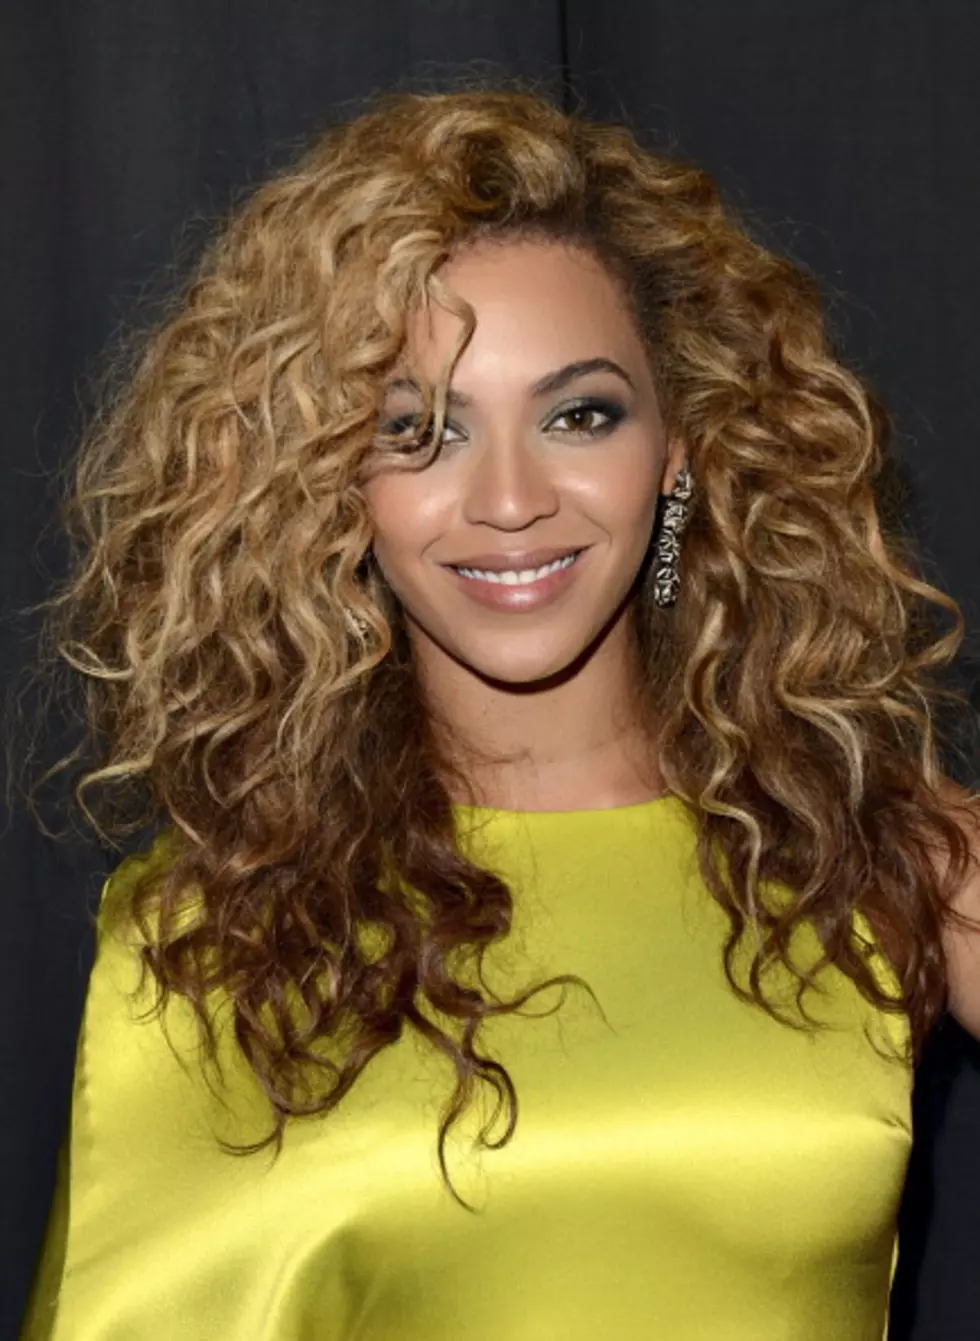 What Will Beyonce Sing at the Super Bowl?